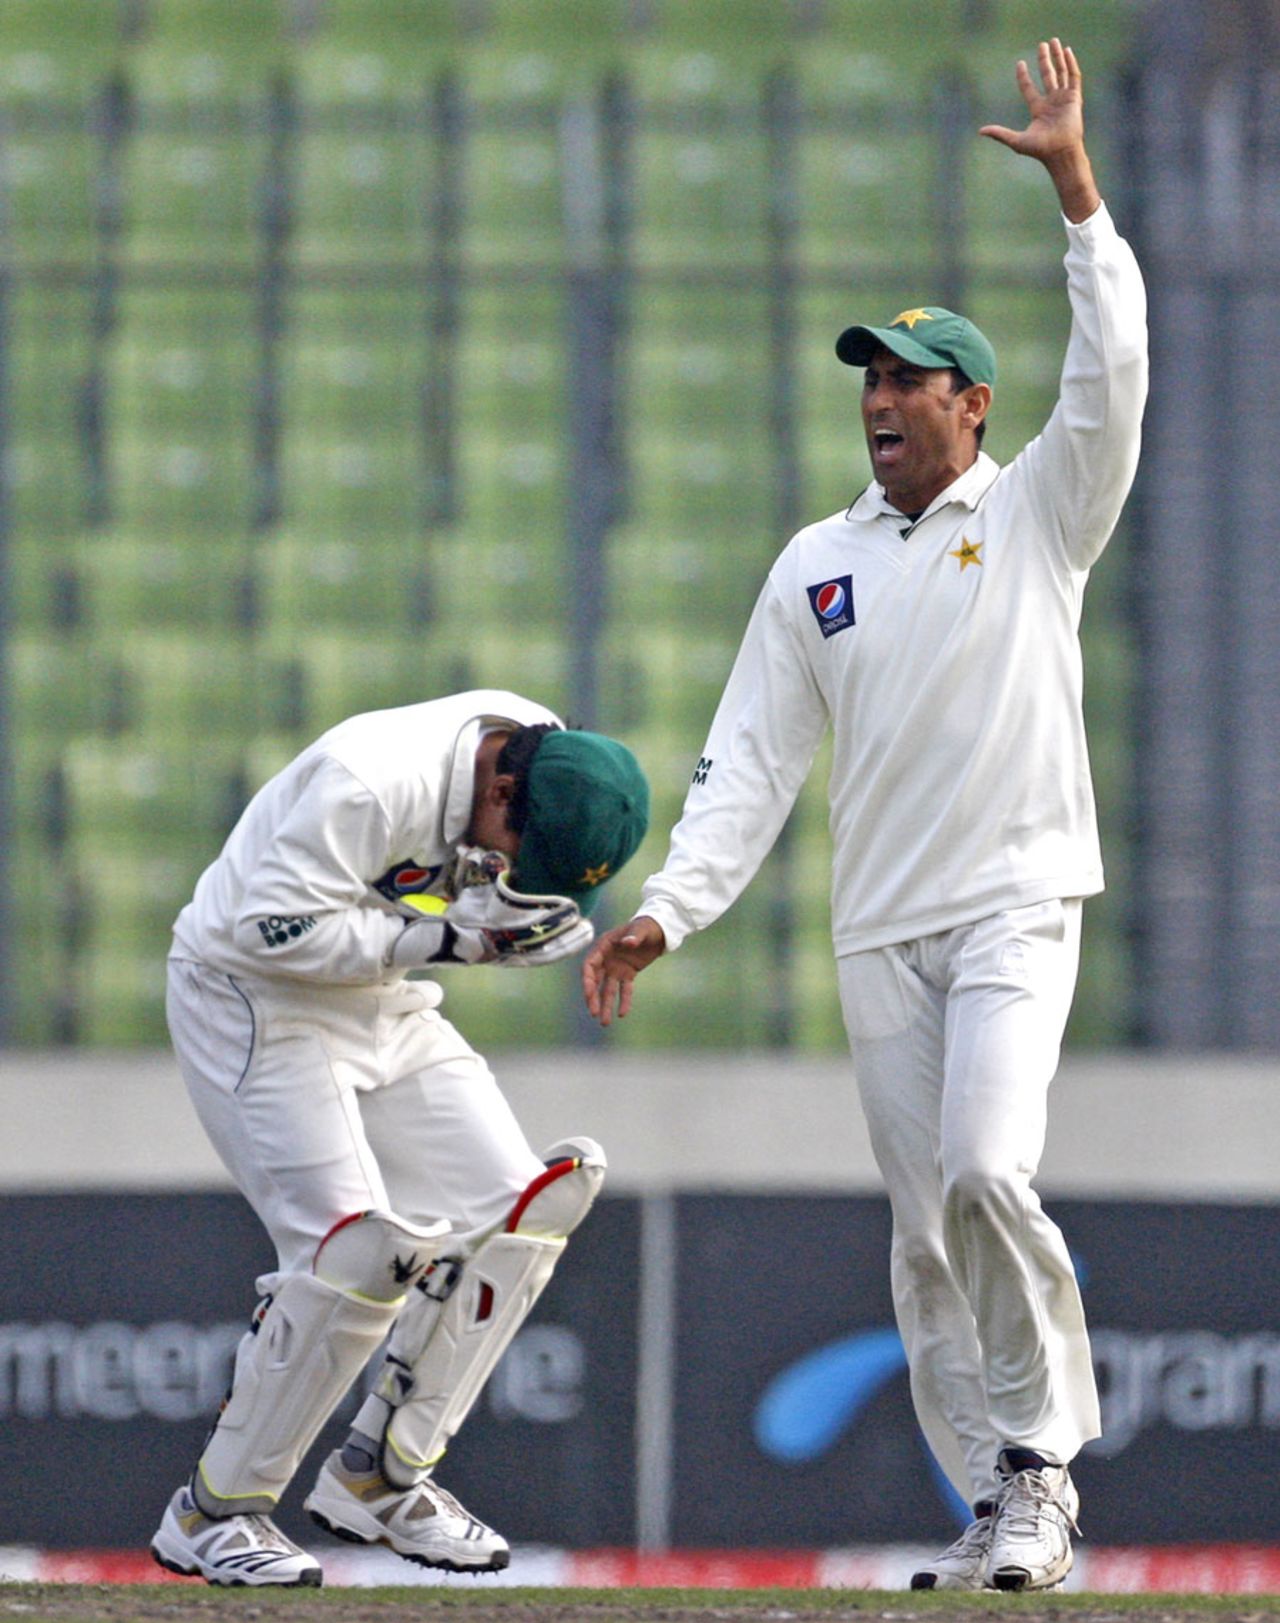 Adnan Akmal was struck on the mouth, Bangladesh v Pakistan, 2nd Test, Mirpur, 2nd day, December 18, 2011 